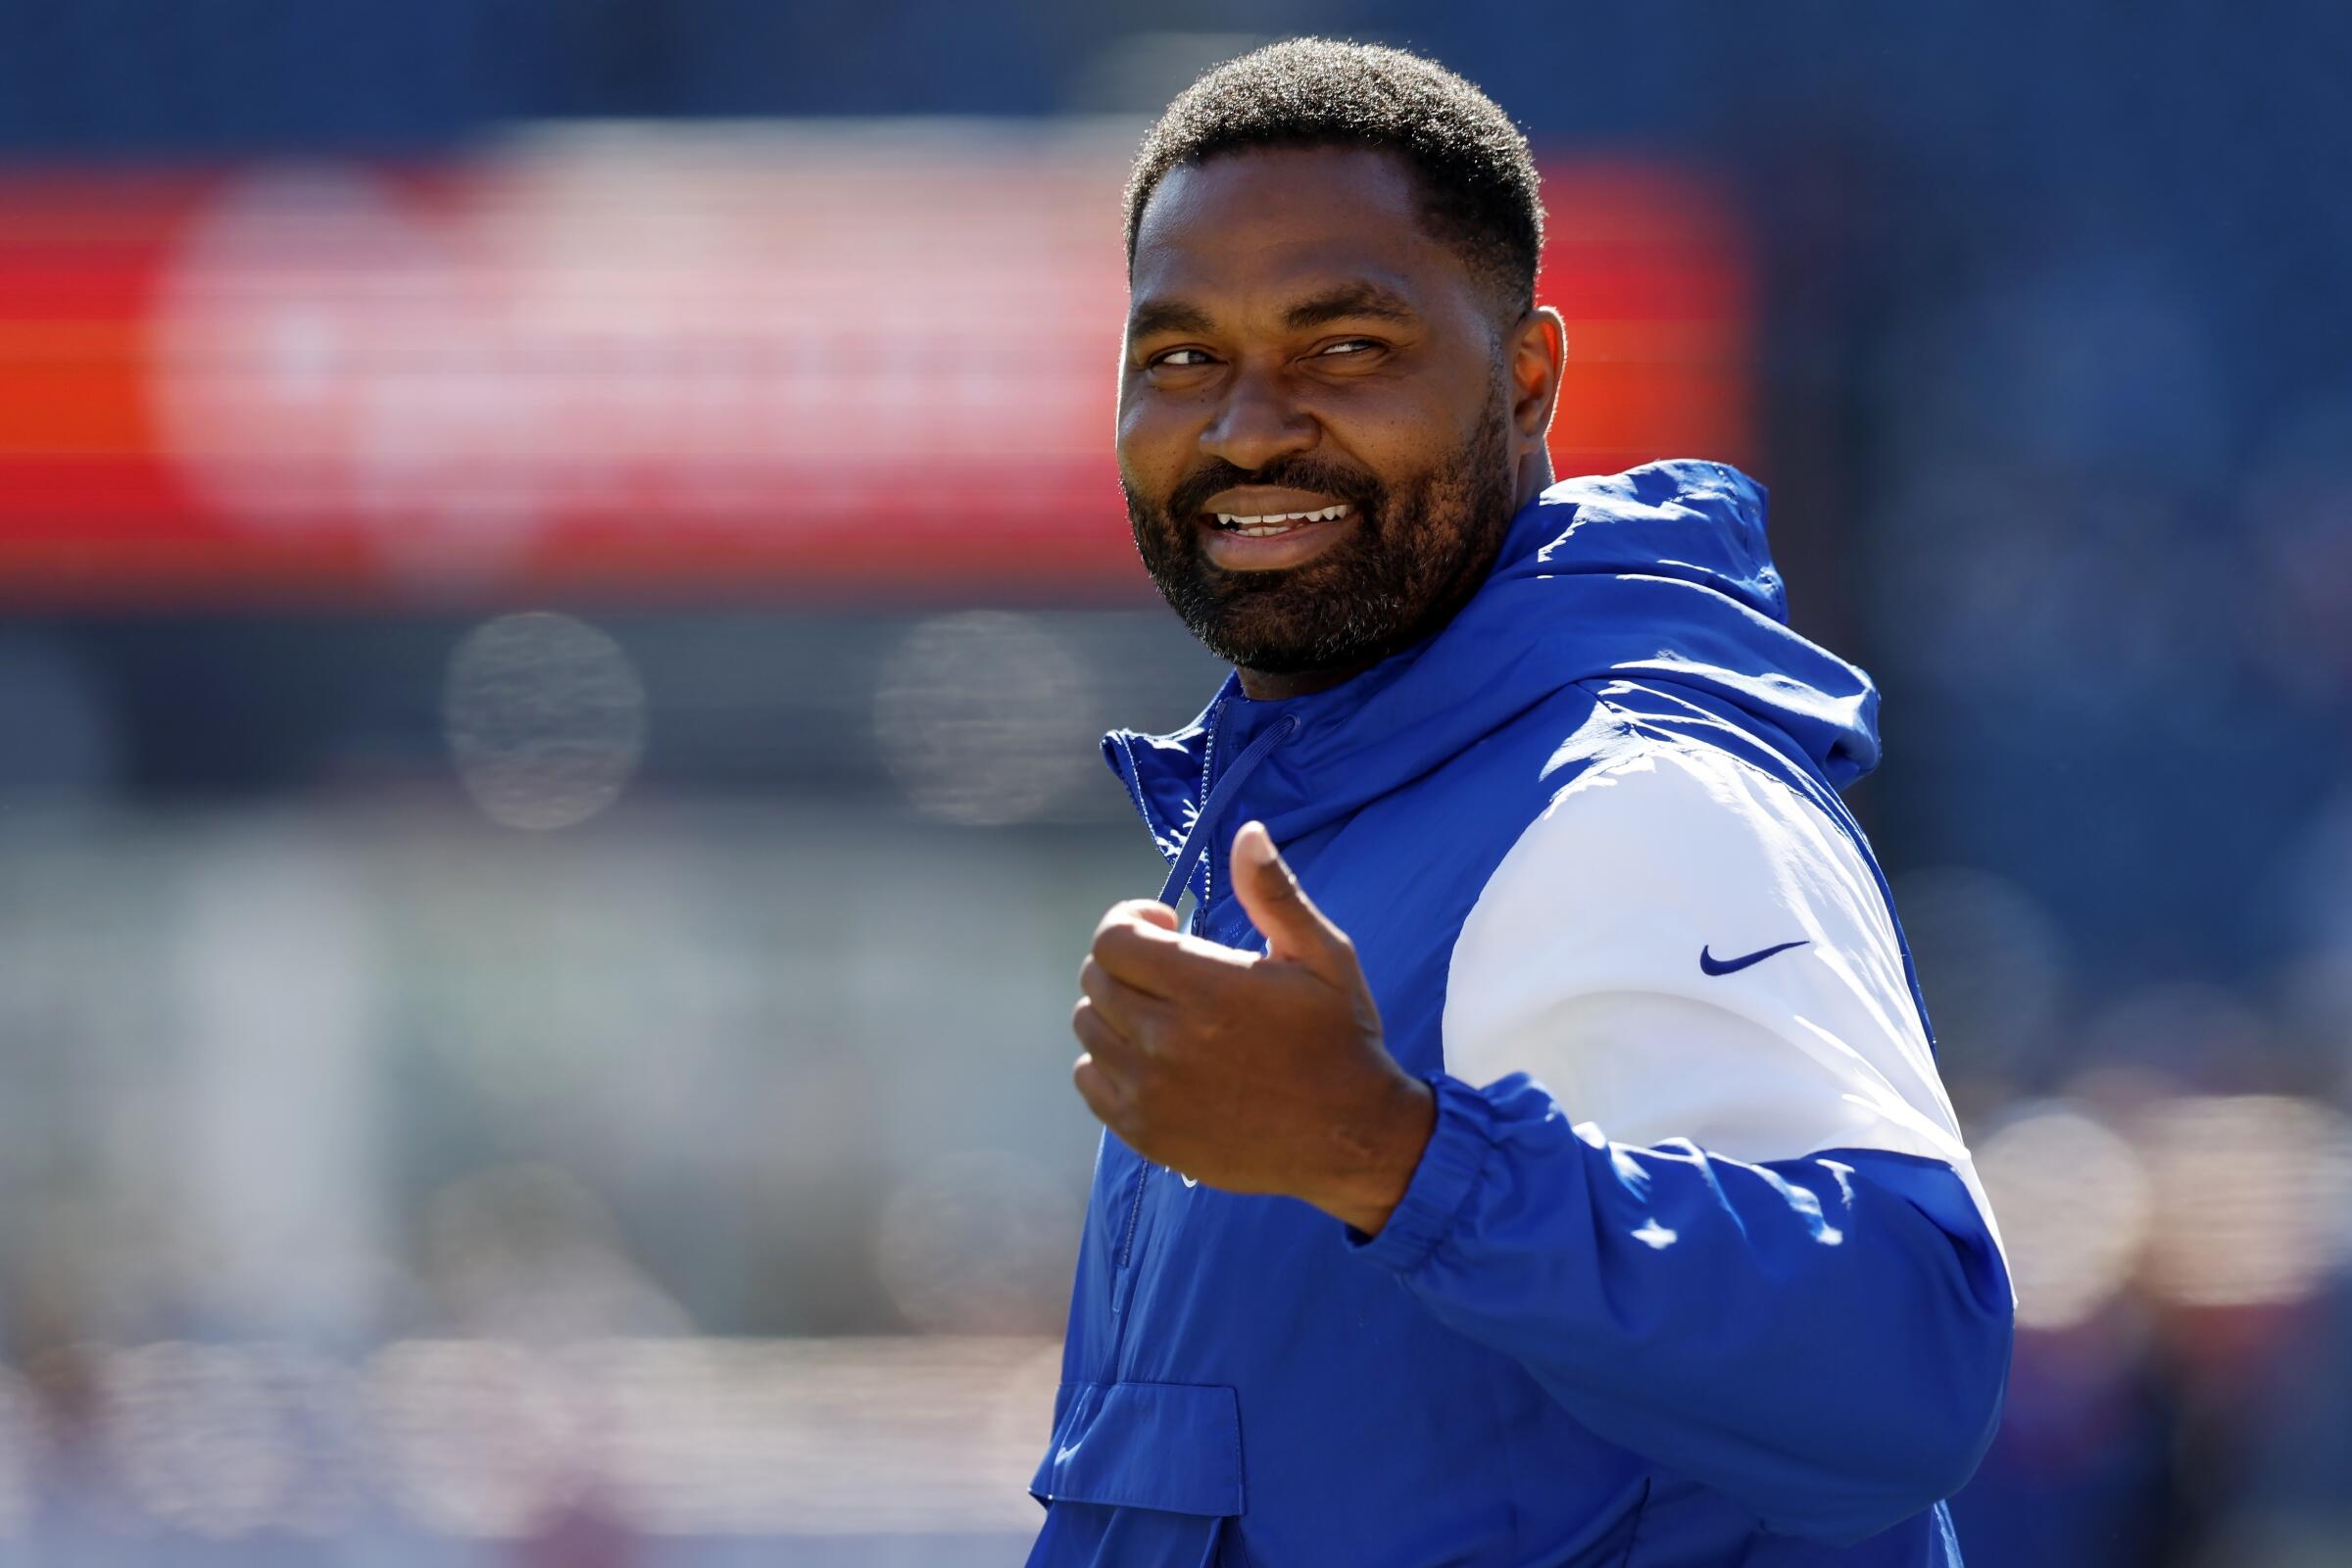 Patriots linebackers coach Jerod Mayo walks on the field before a game against the Lions.